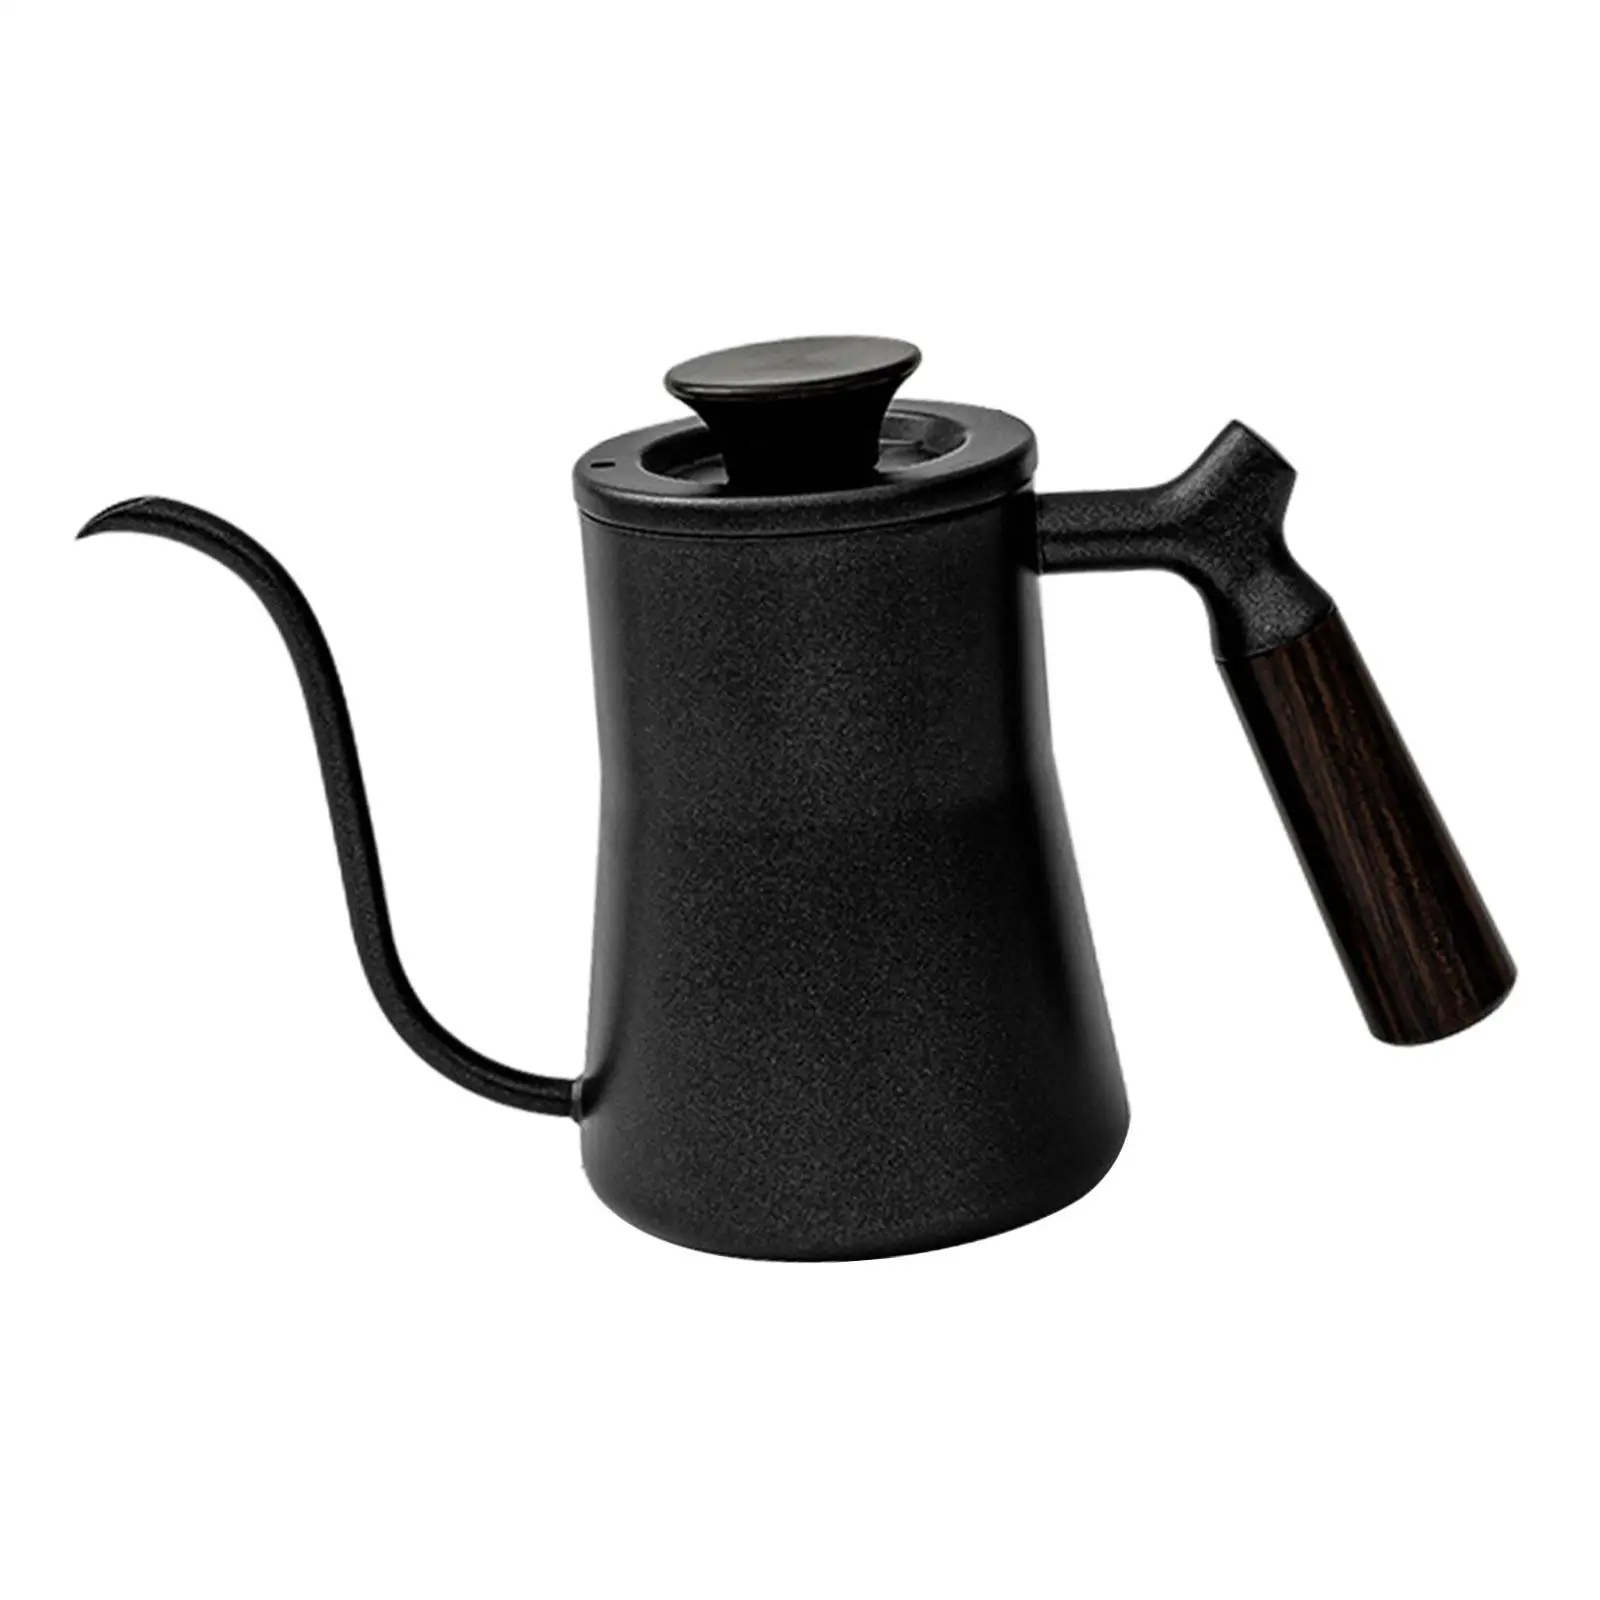 Tea Pot with Wood Handle Lightweight Long Narrow Spout Anti Rust Gooseneck Kettle Pour over Drip Kettle for Office Camping Home